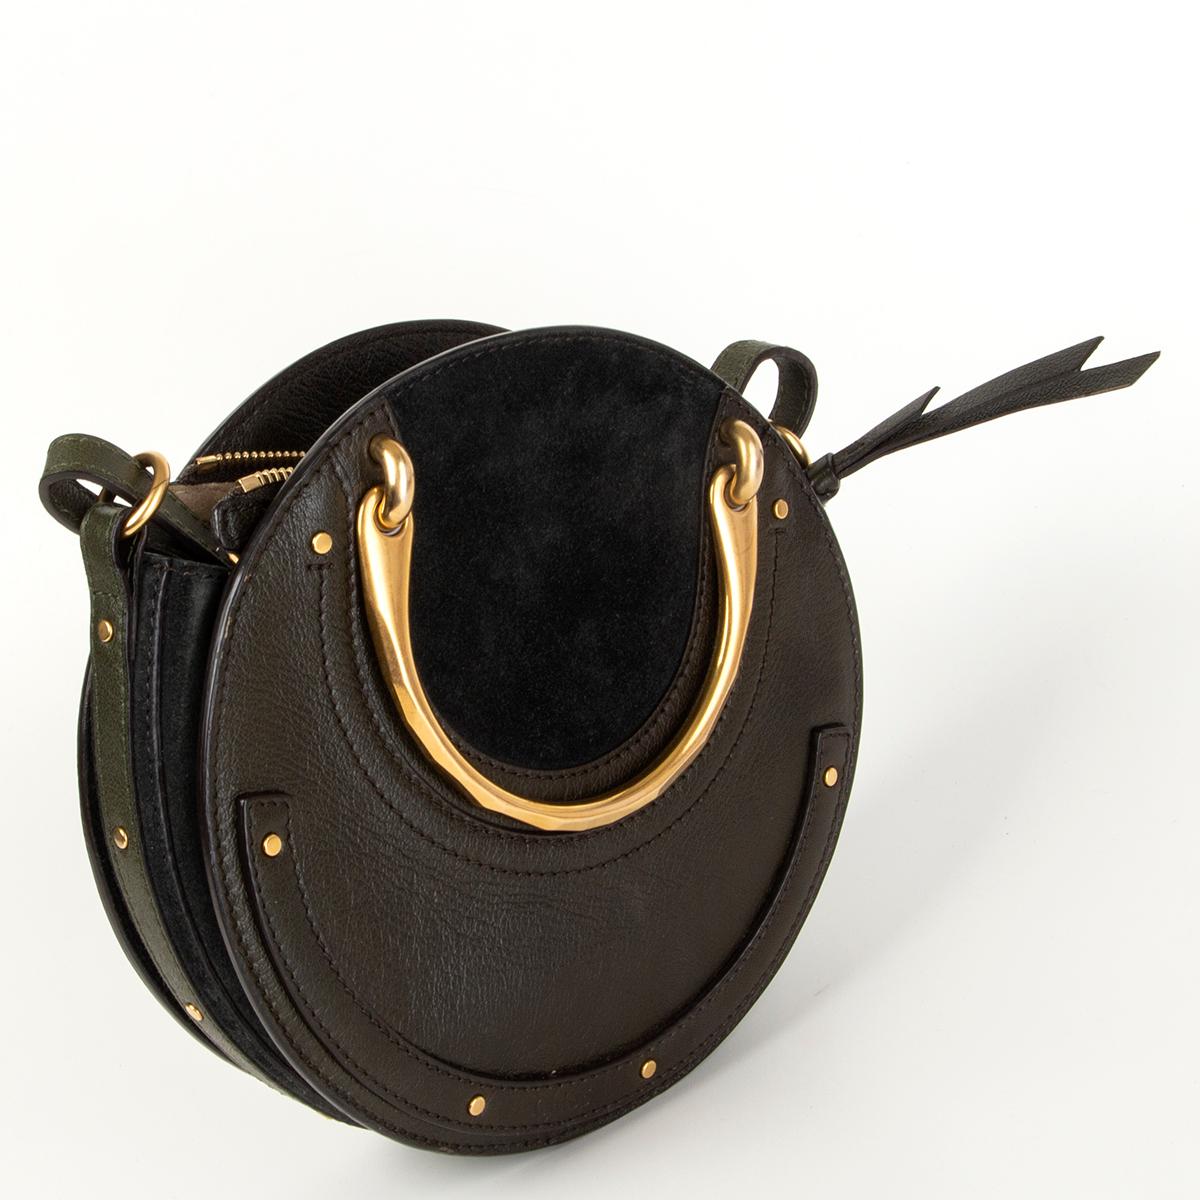 Chloé 'Pixie Small Double Handle' circle shoulder bag in deep forest green paneled calfskin and suede with stud trim. Brassy round tote handles. Removable and adjustable shoulder strap. Flaps cover recessed zip top closure. Embossed logo at bottom